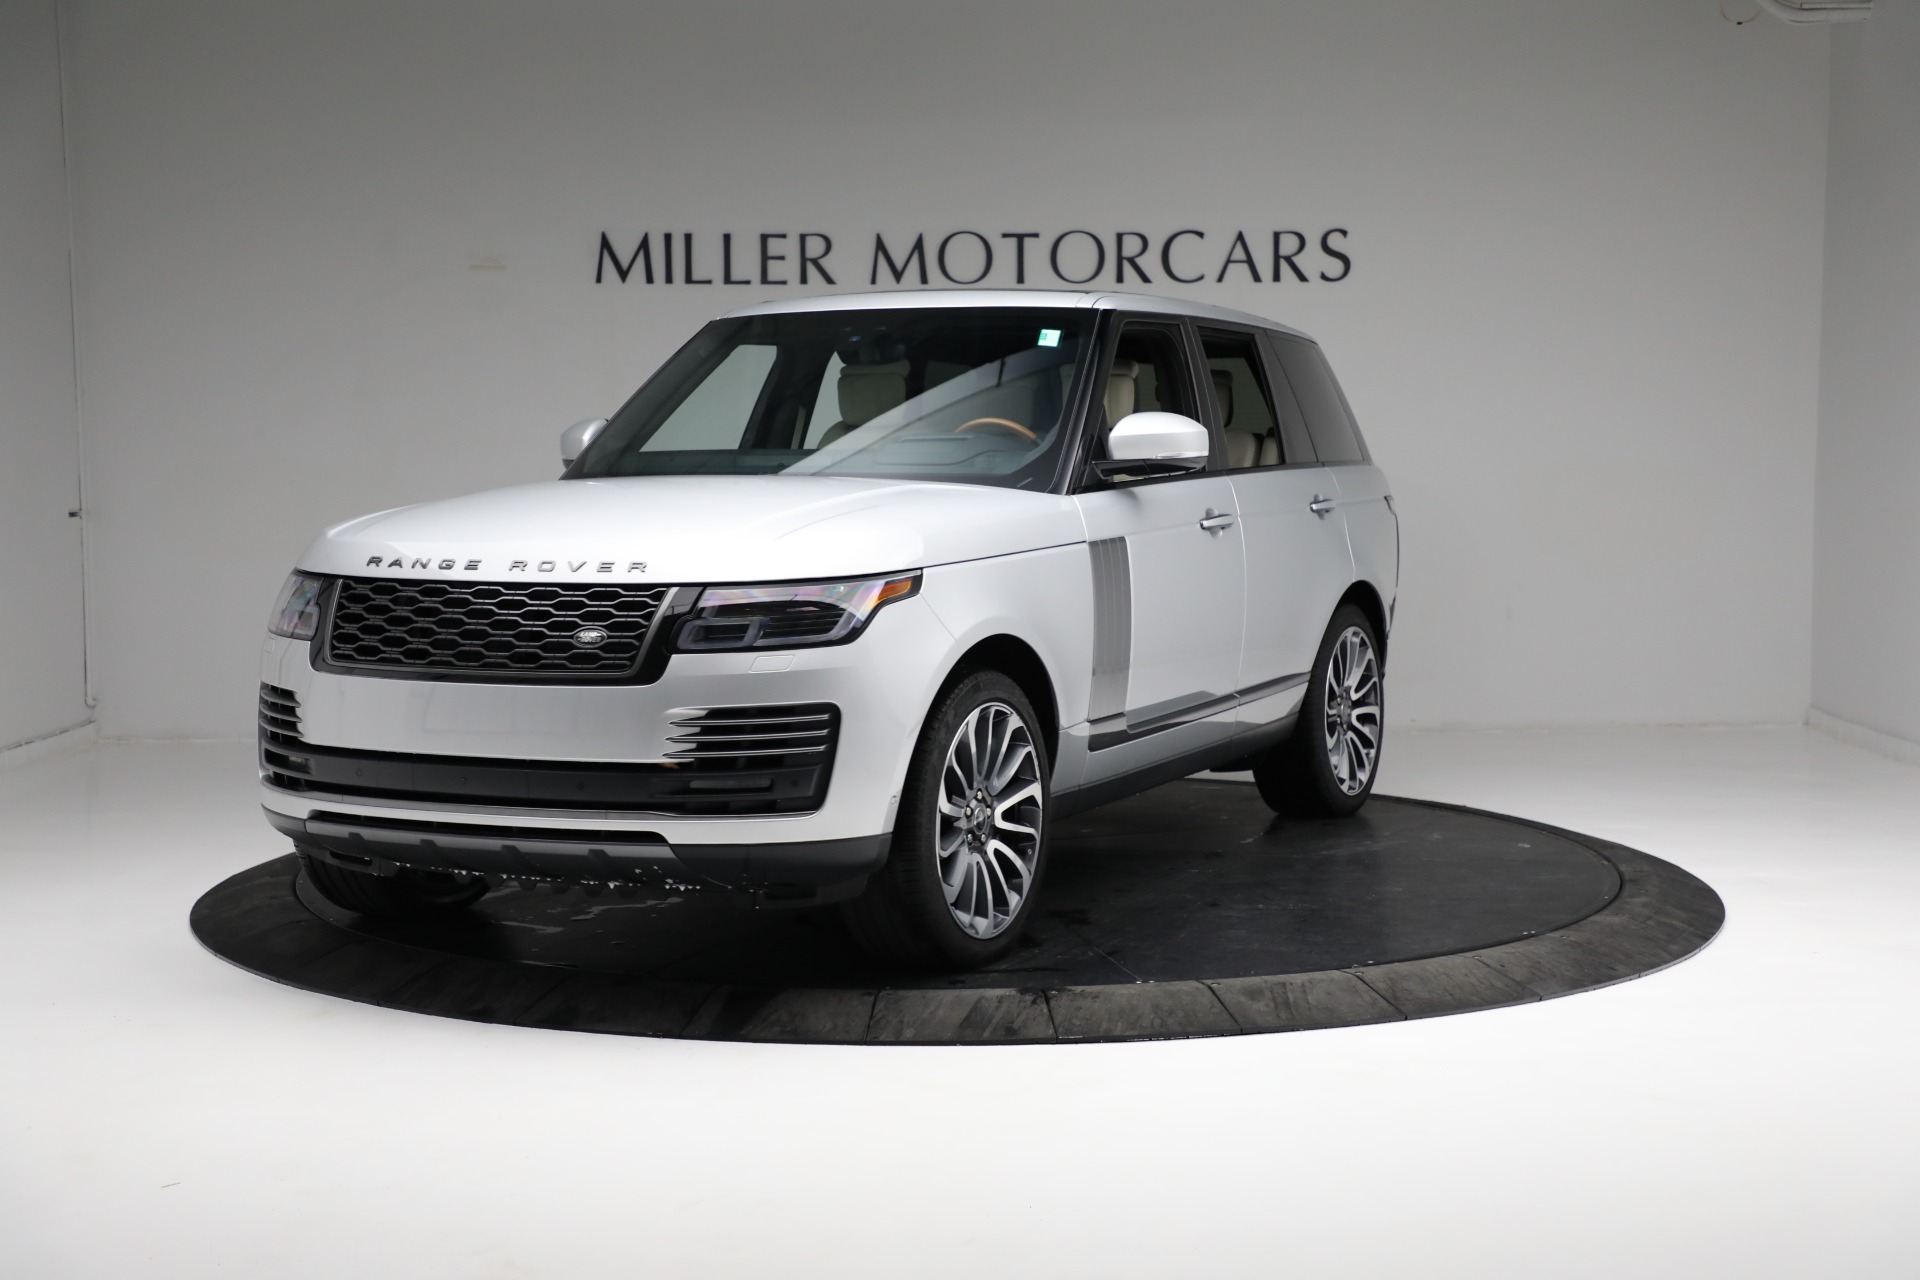 Used 2021 Land Rover Range Rover Autobiography for sale $145,900 at McLaren Greenwich in Greenwich CT 06830 1